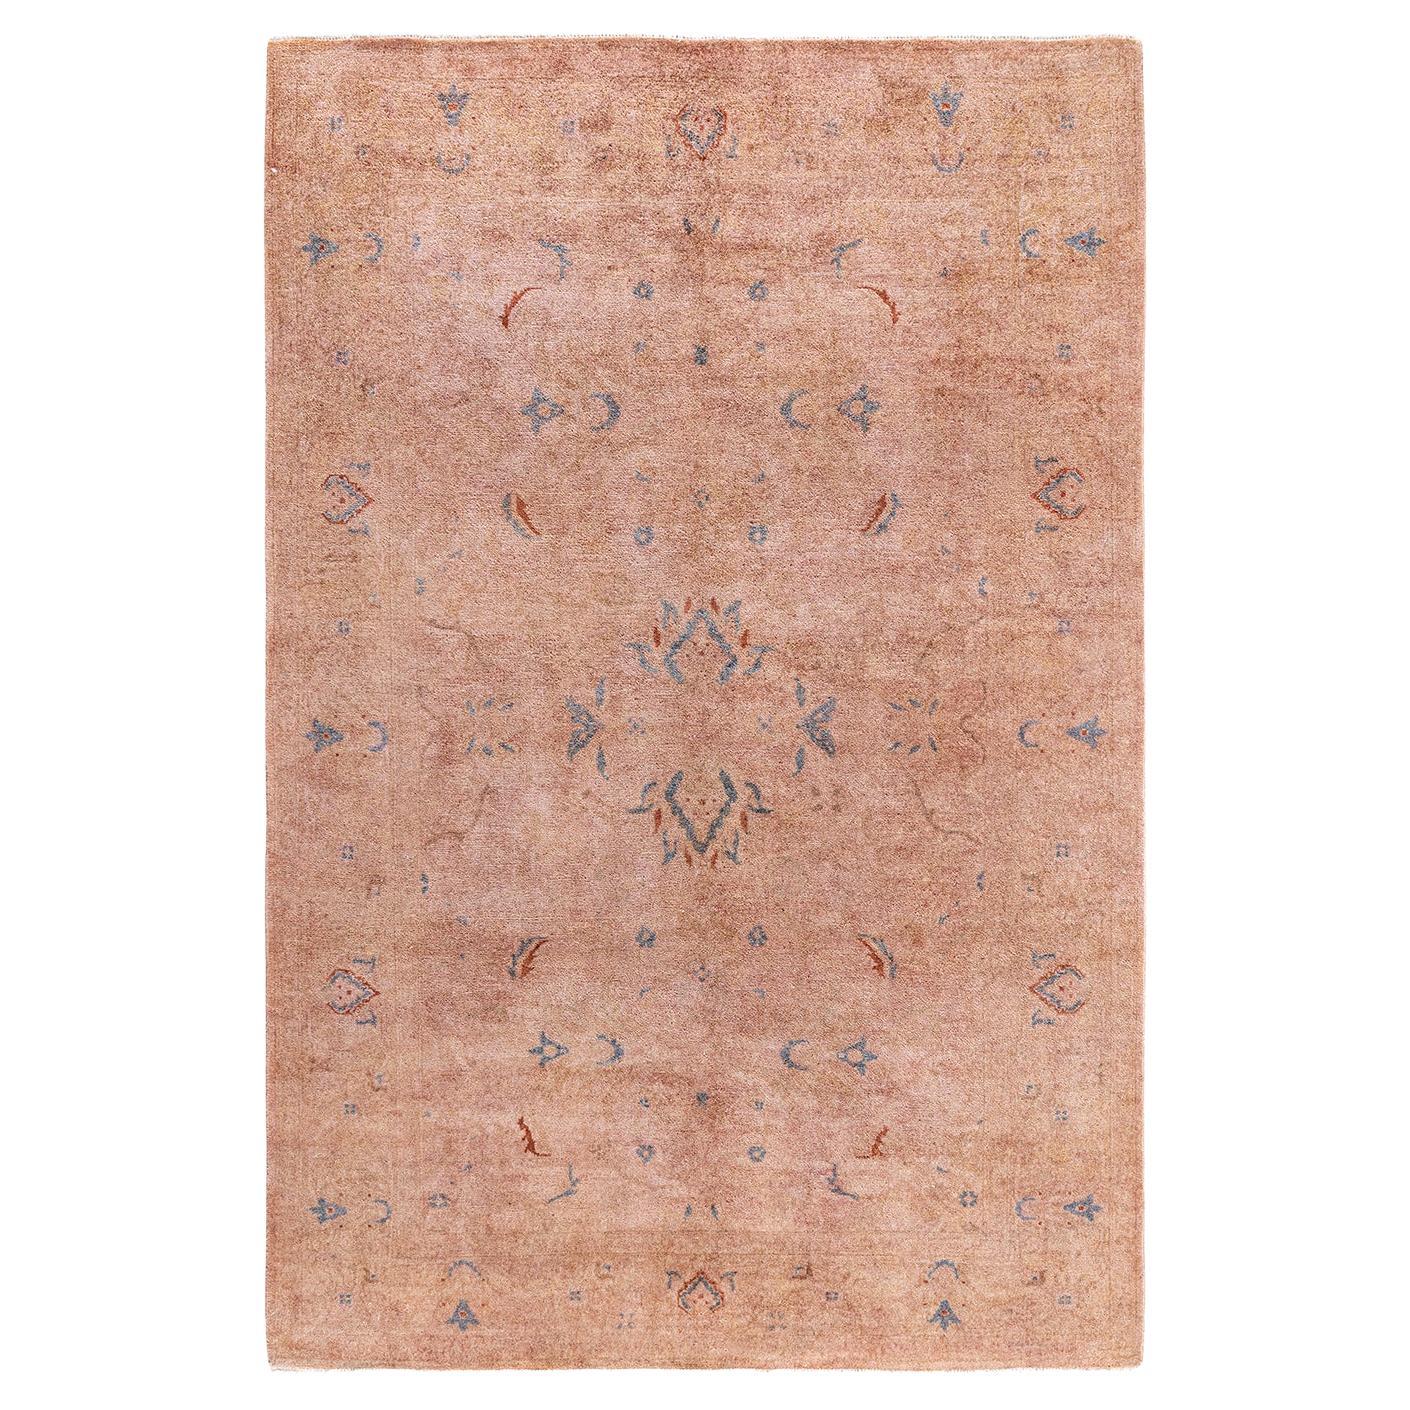 Contemporary Vibrance Hand Knotted Wool Gold Area Rug